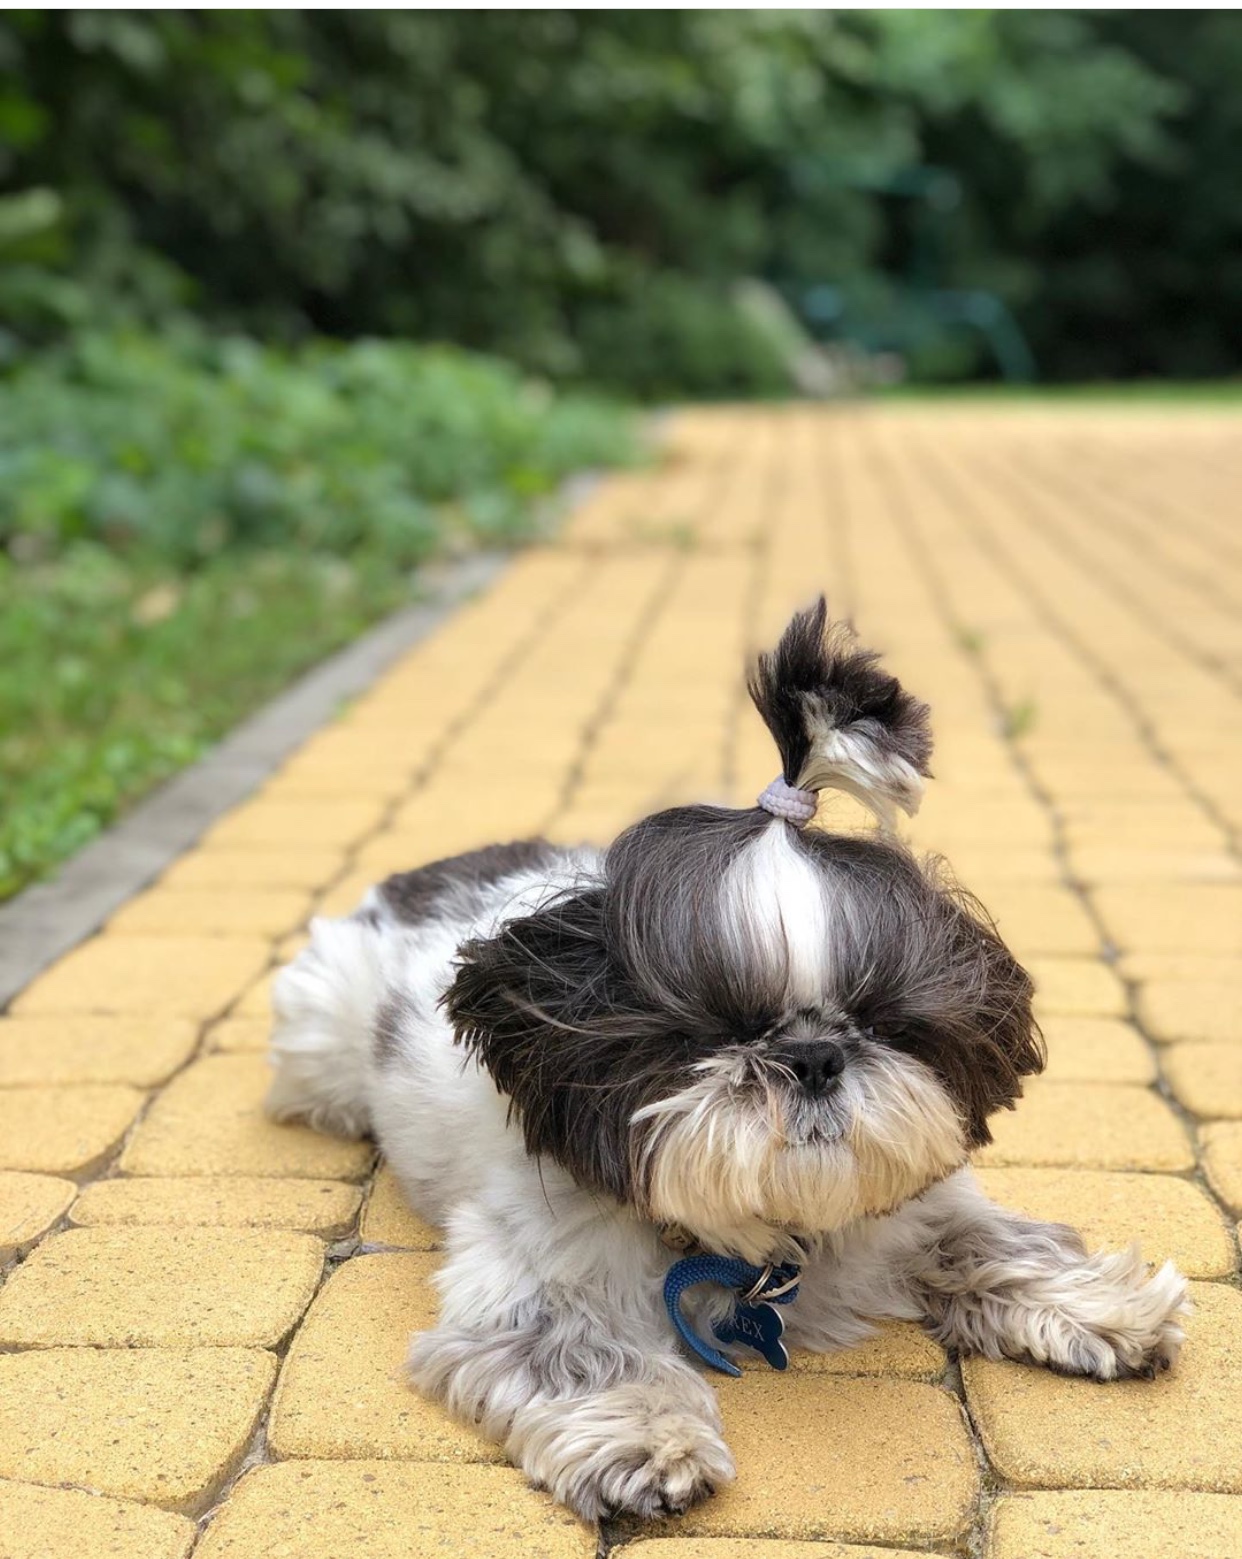 A Shih Tzu with a ponytail on top of its head while lying down on the pavement pathway at the park